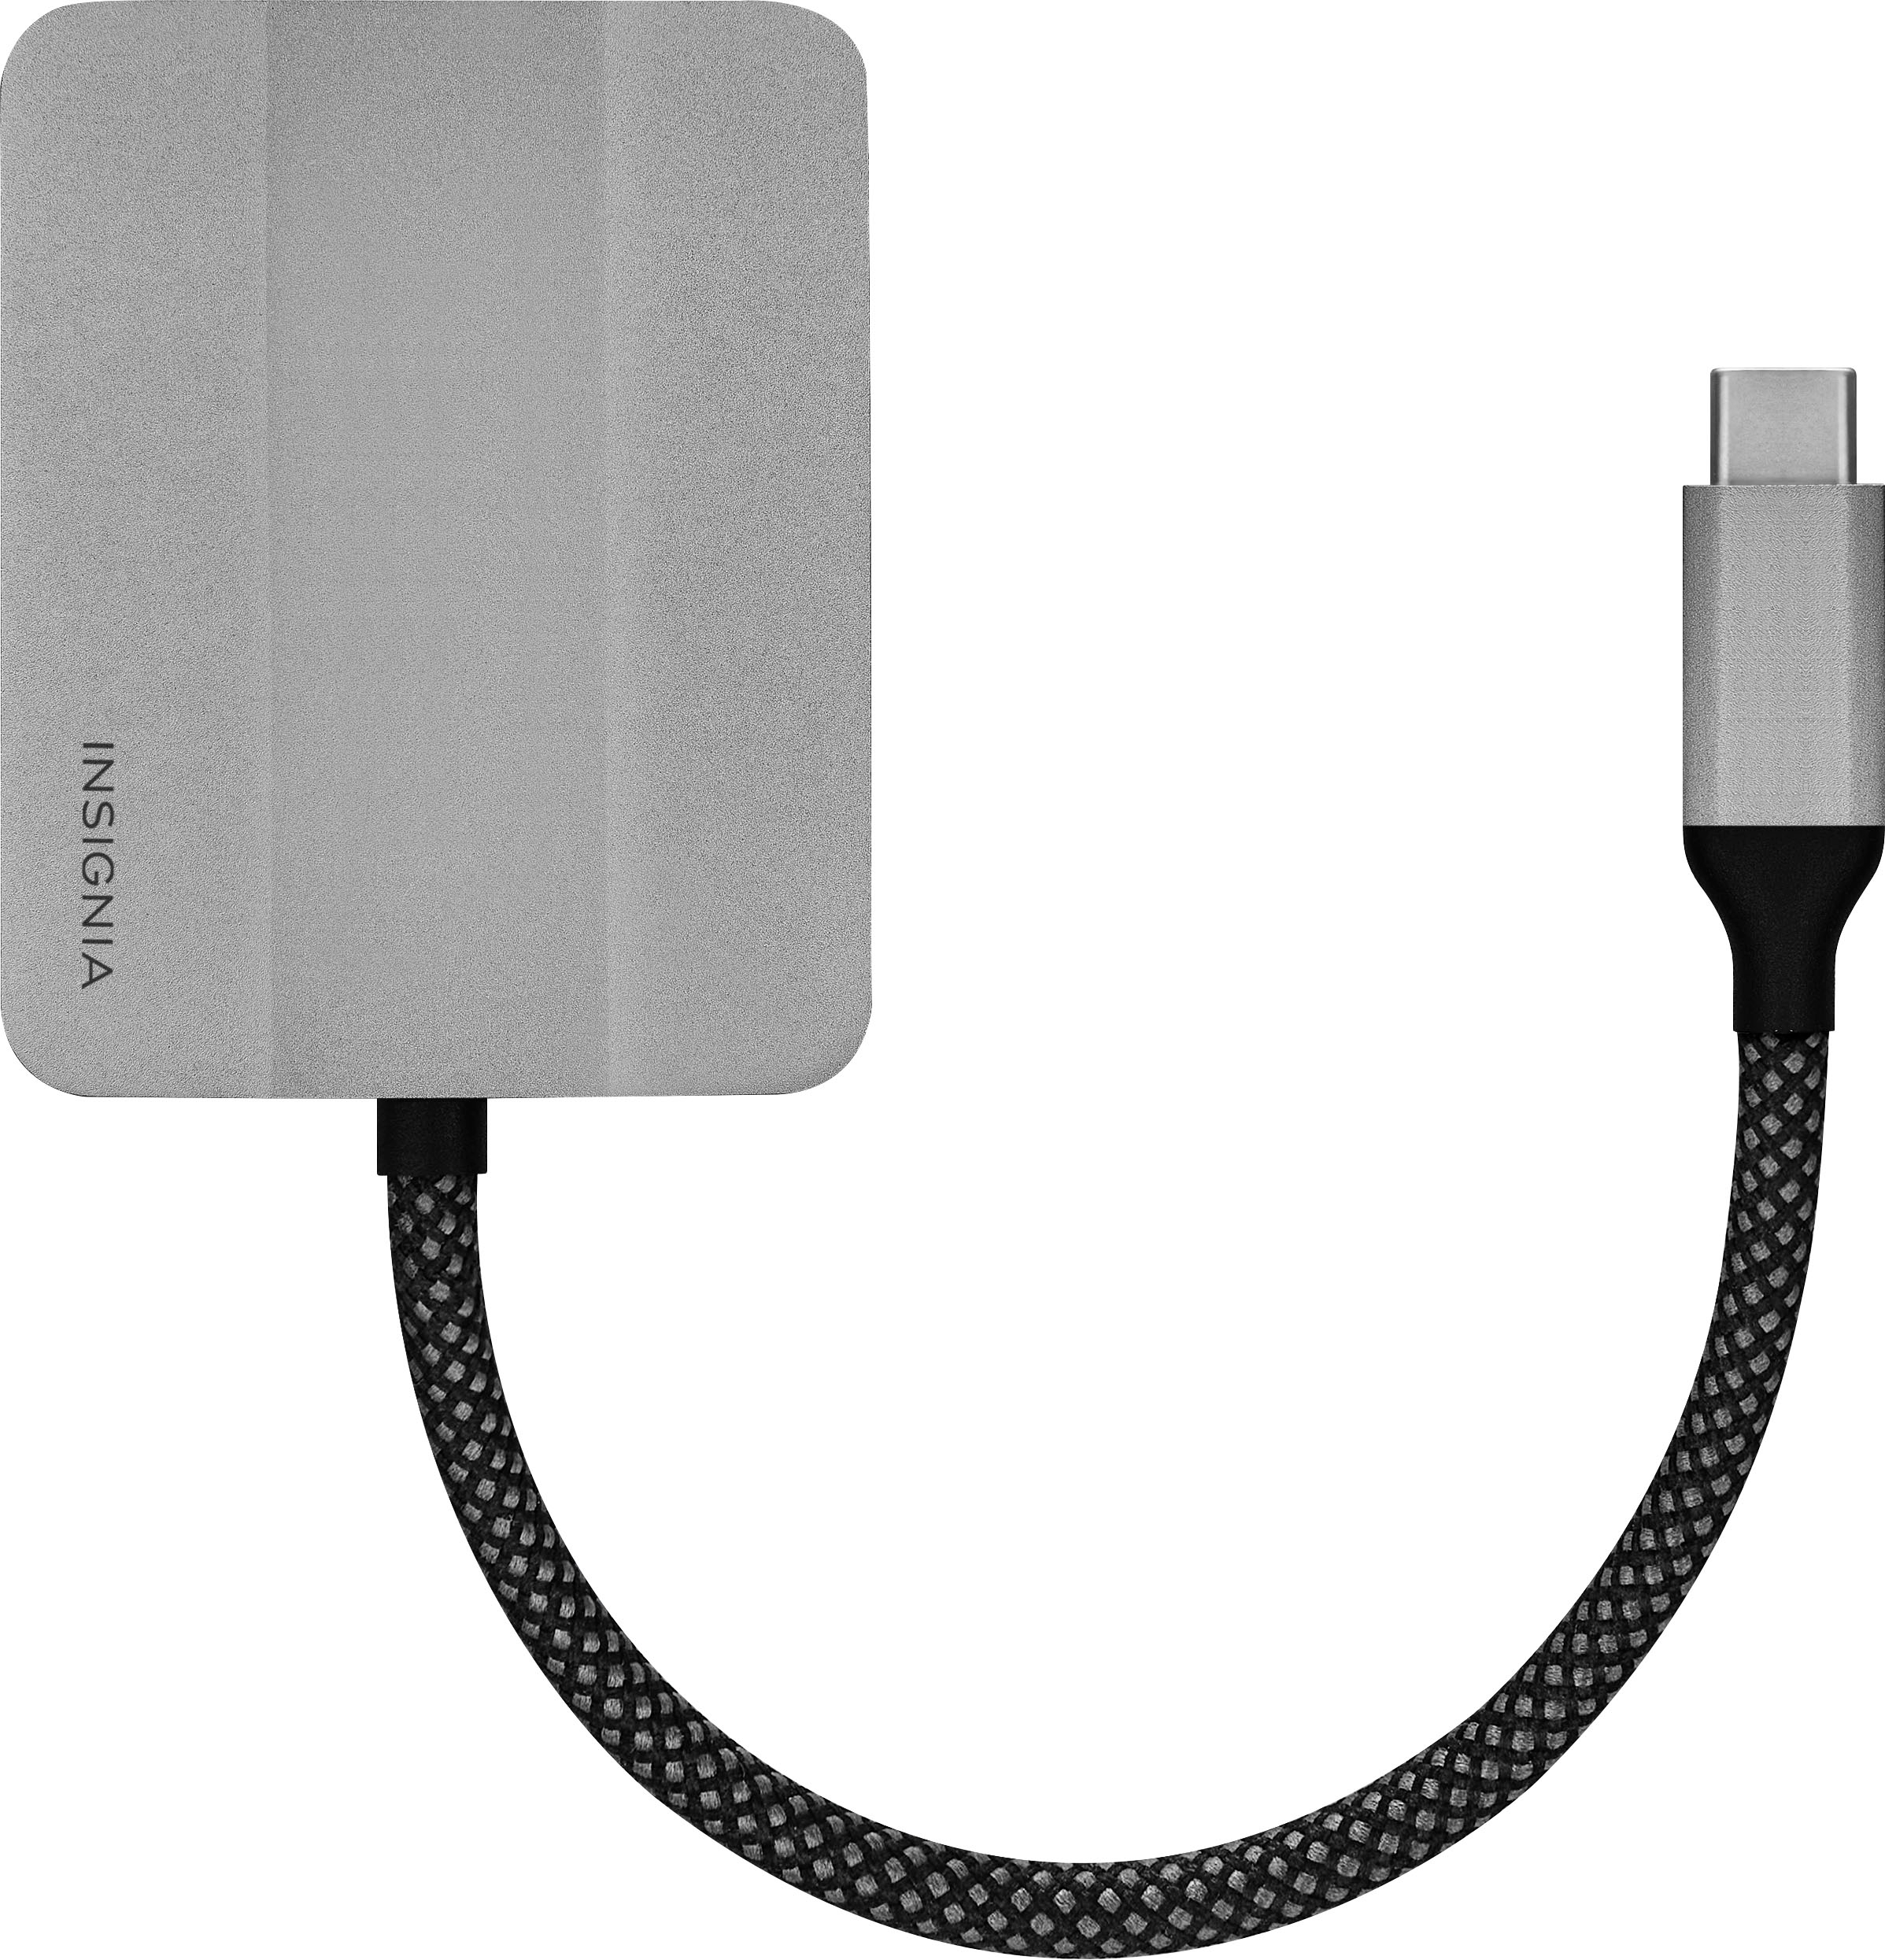 USB-C™ to HDMI 4K Adapter